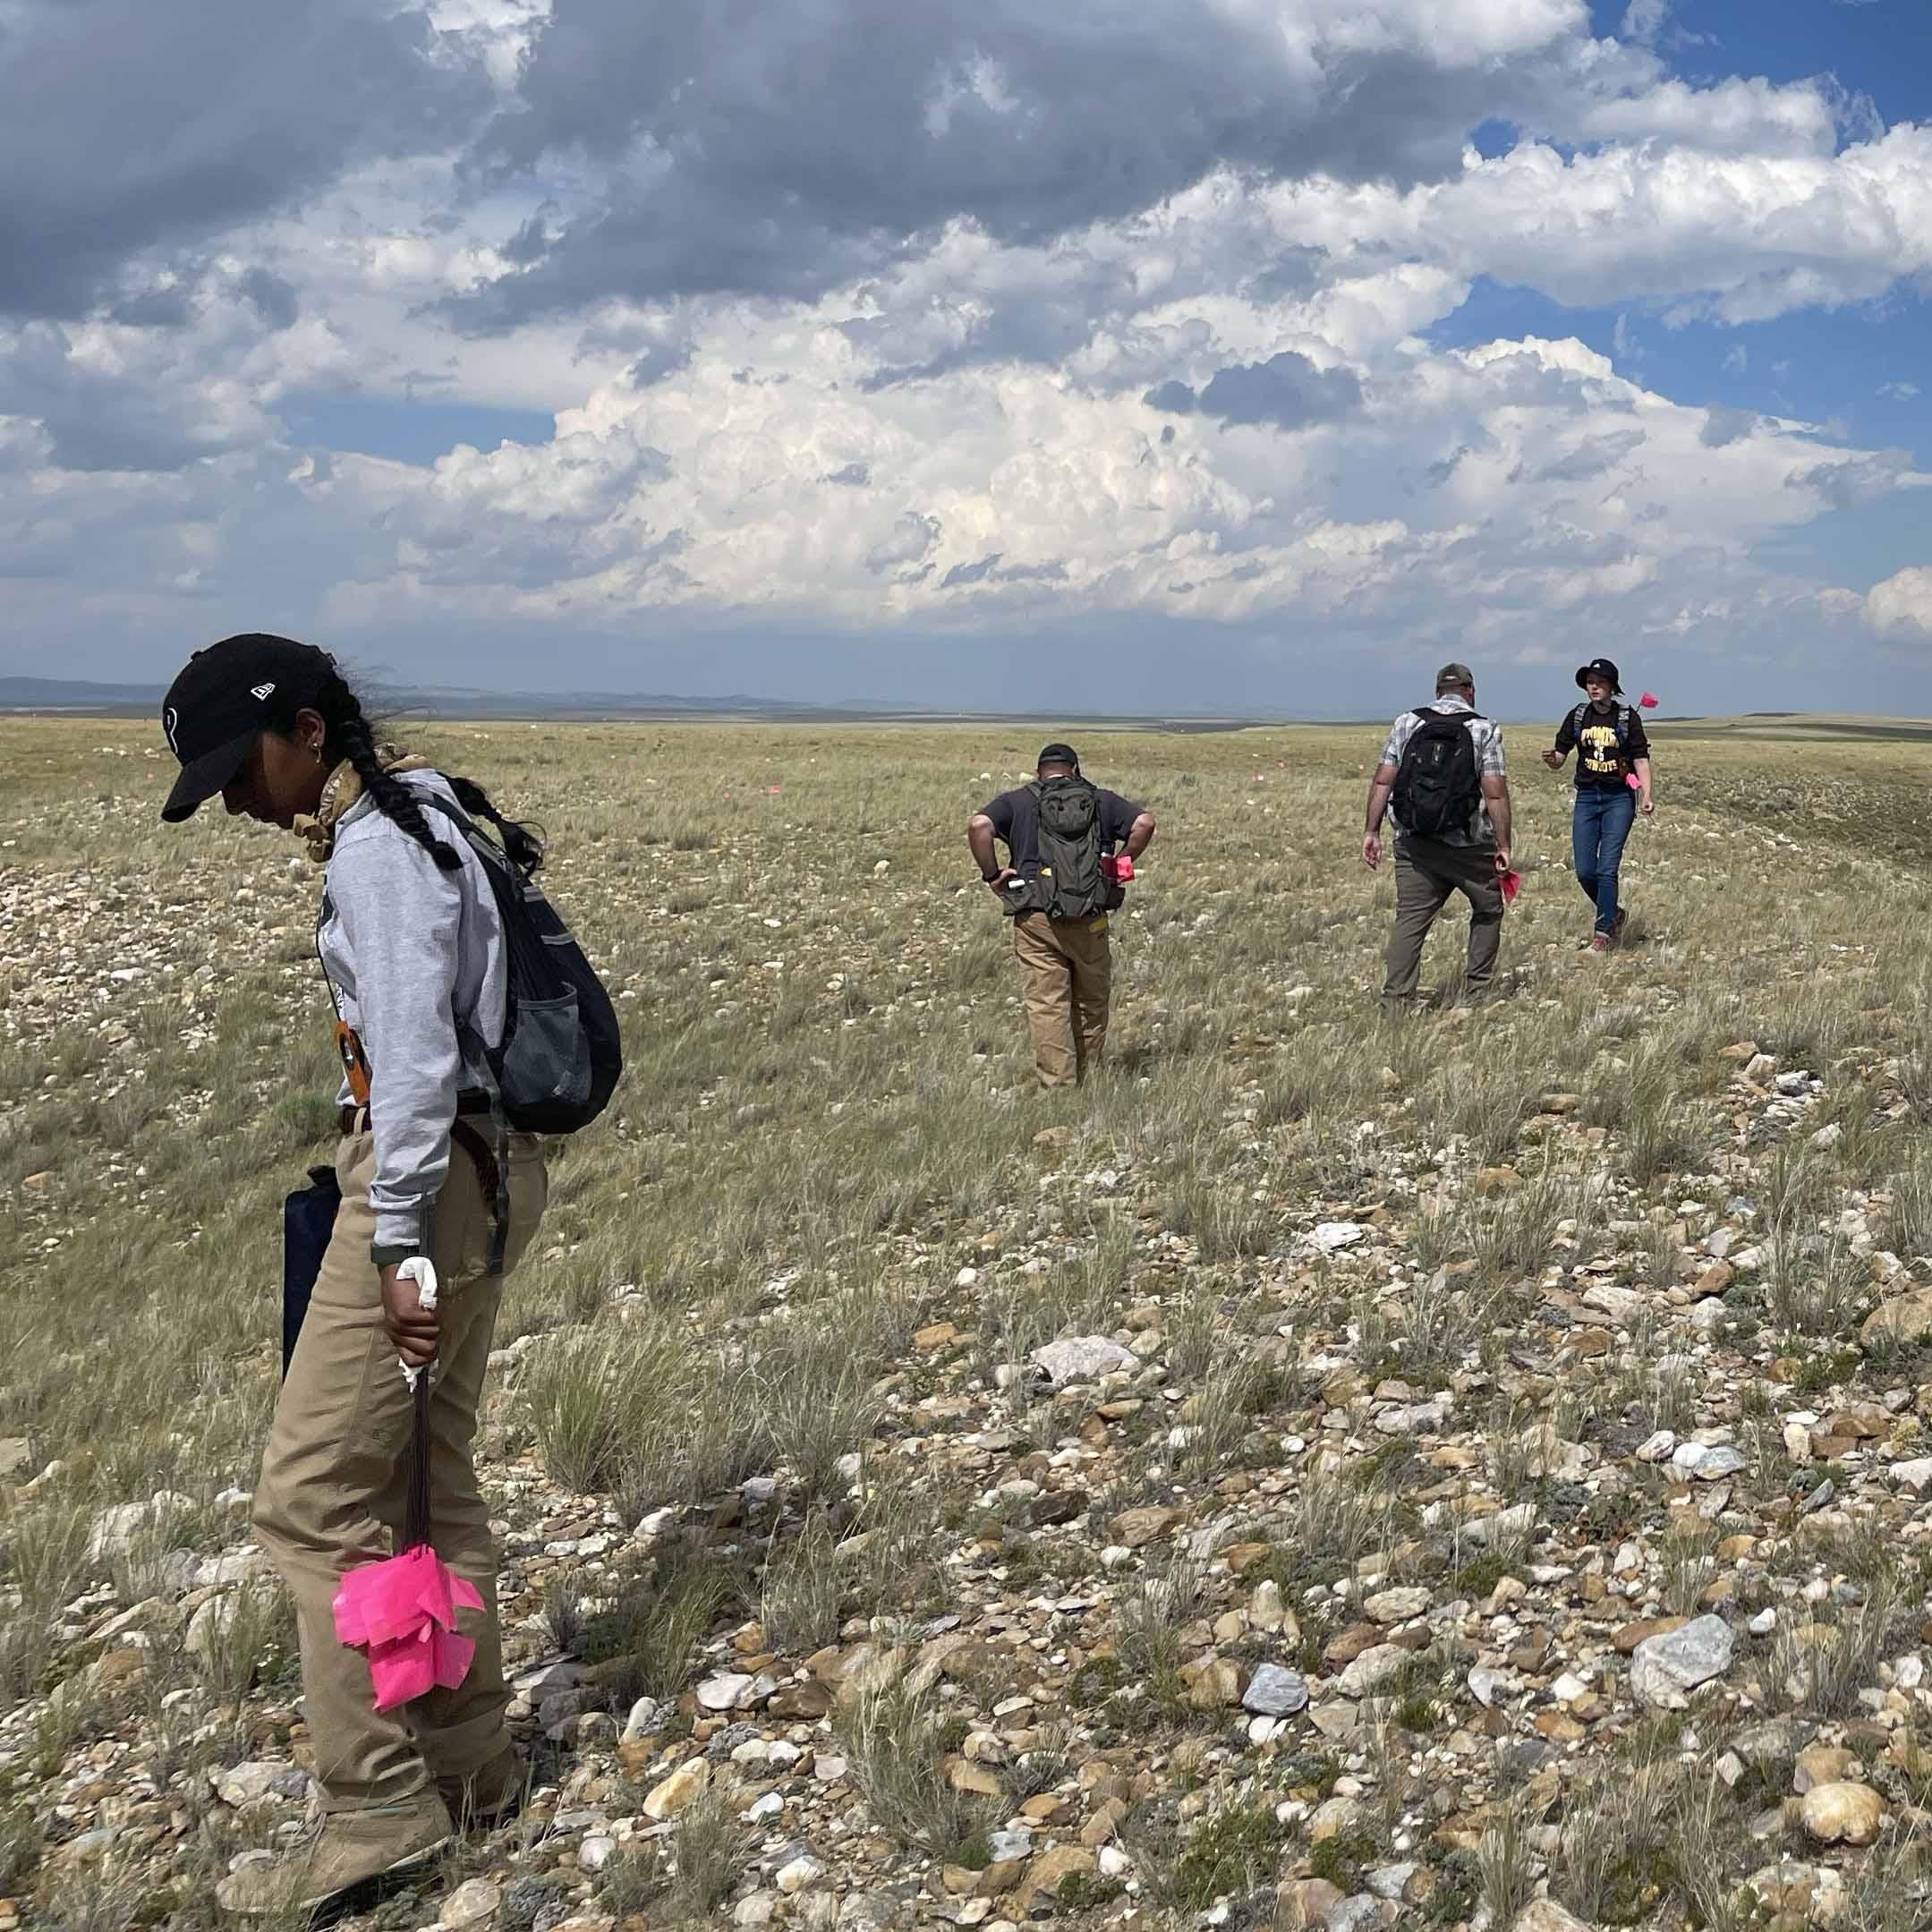 Frederick Honors College students carried pink flags to mark where artifacts are found on the surface at the Alan L. Cook Spring Creek Preserve site in southeastern Wyoming in the summer of 2023. Pictured, from left, are Pitt students Maya Muttathil, Dan Garner, Jim Johnson, and Sophia Freemyer.